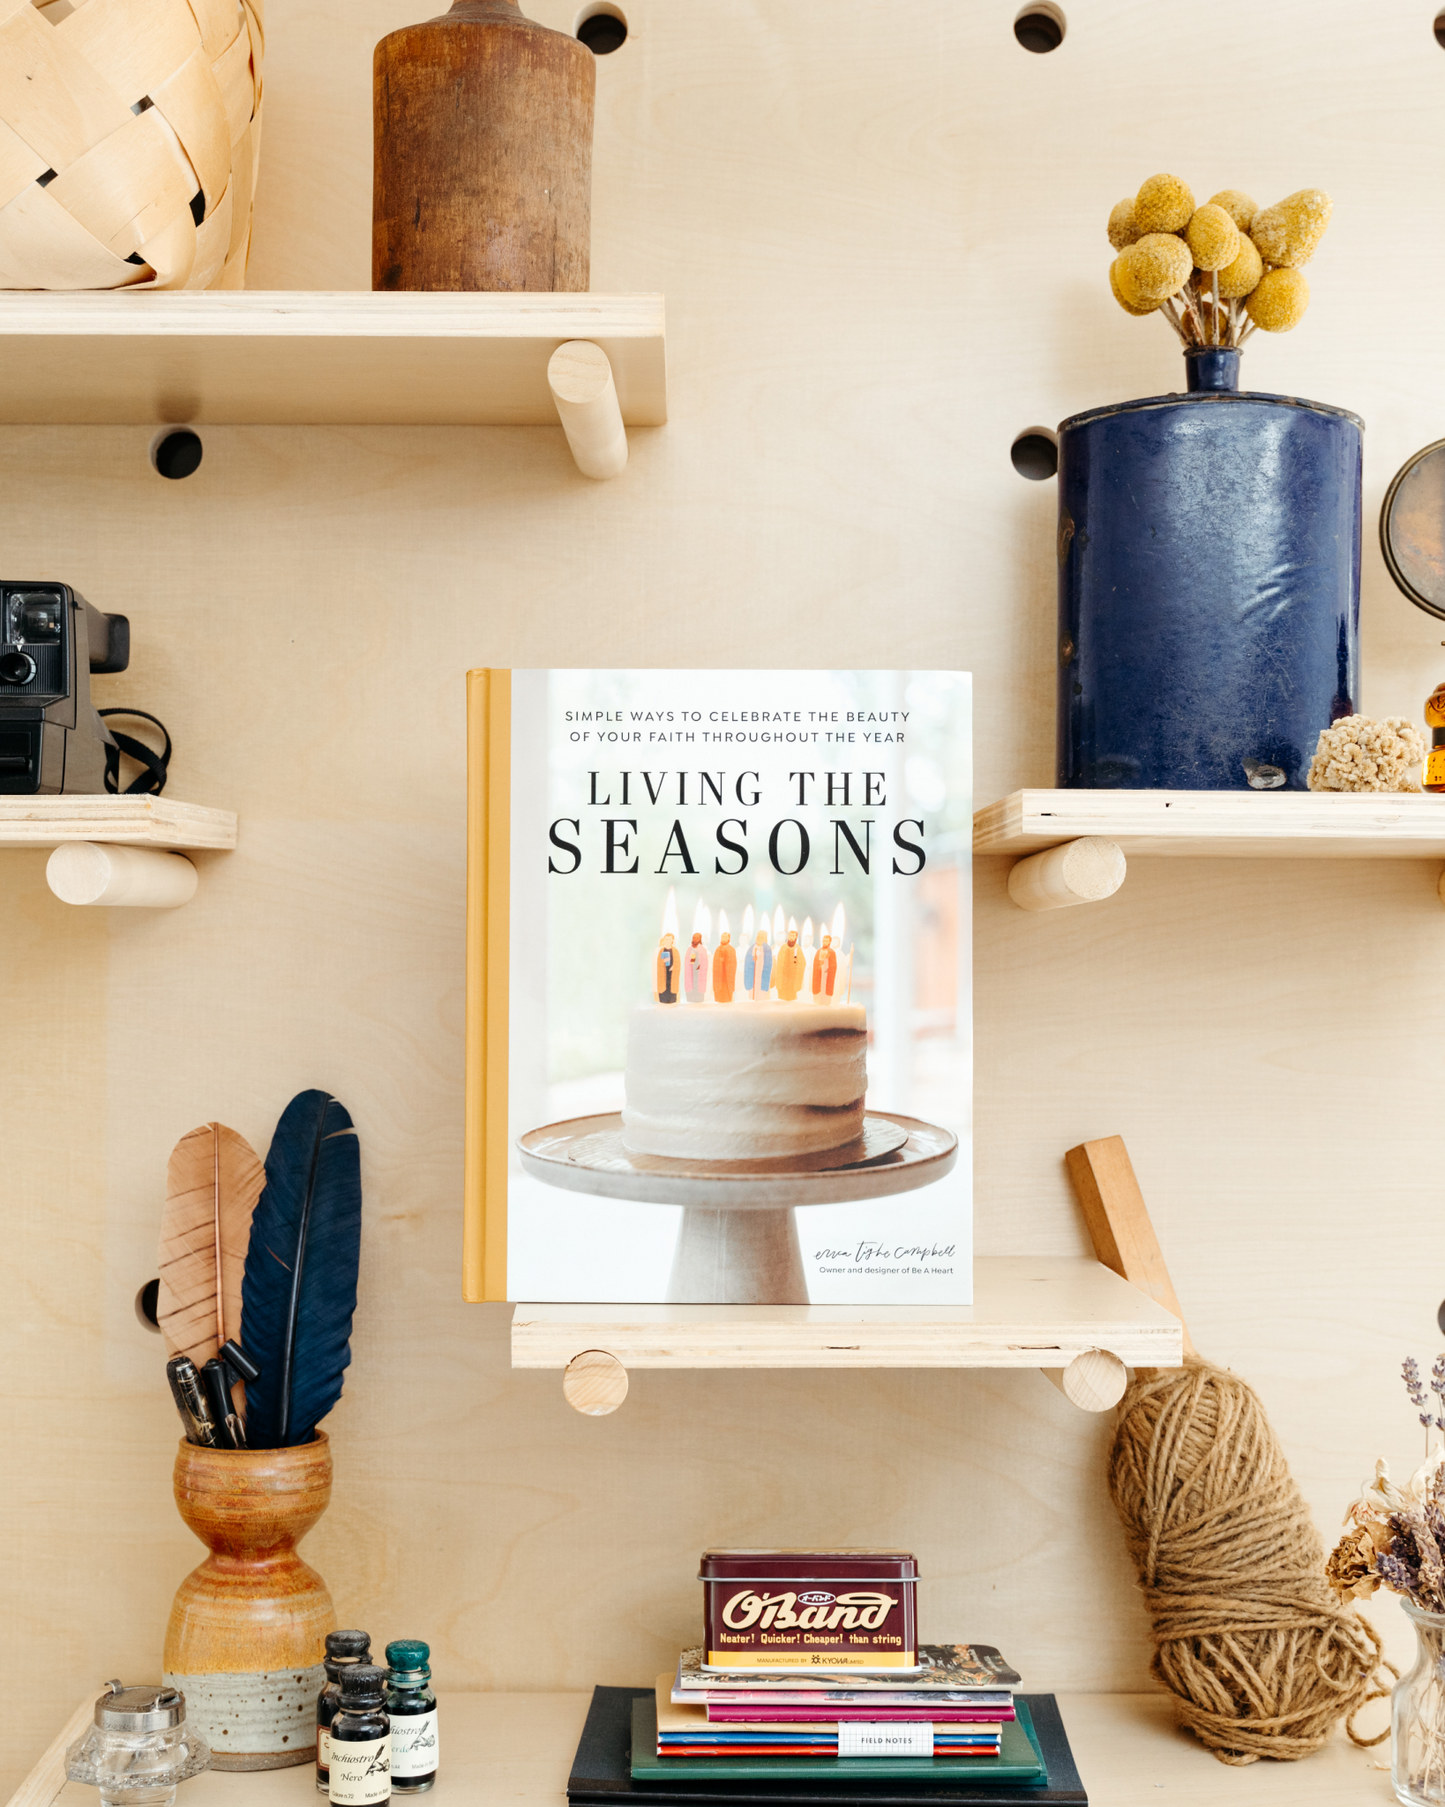 Living the Seasons: Simple Ways to Celebrate the Beauty of Your Faith Throughout the Year by Erica Campbell